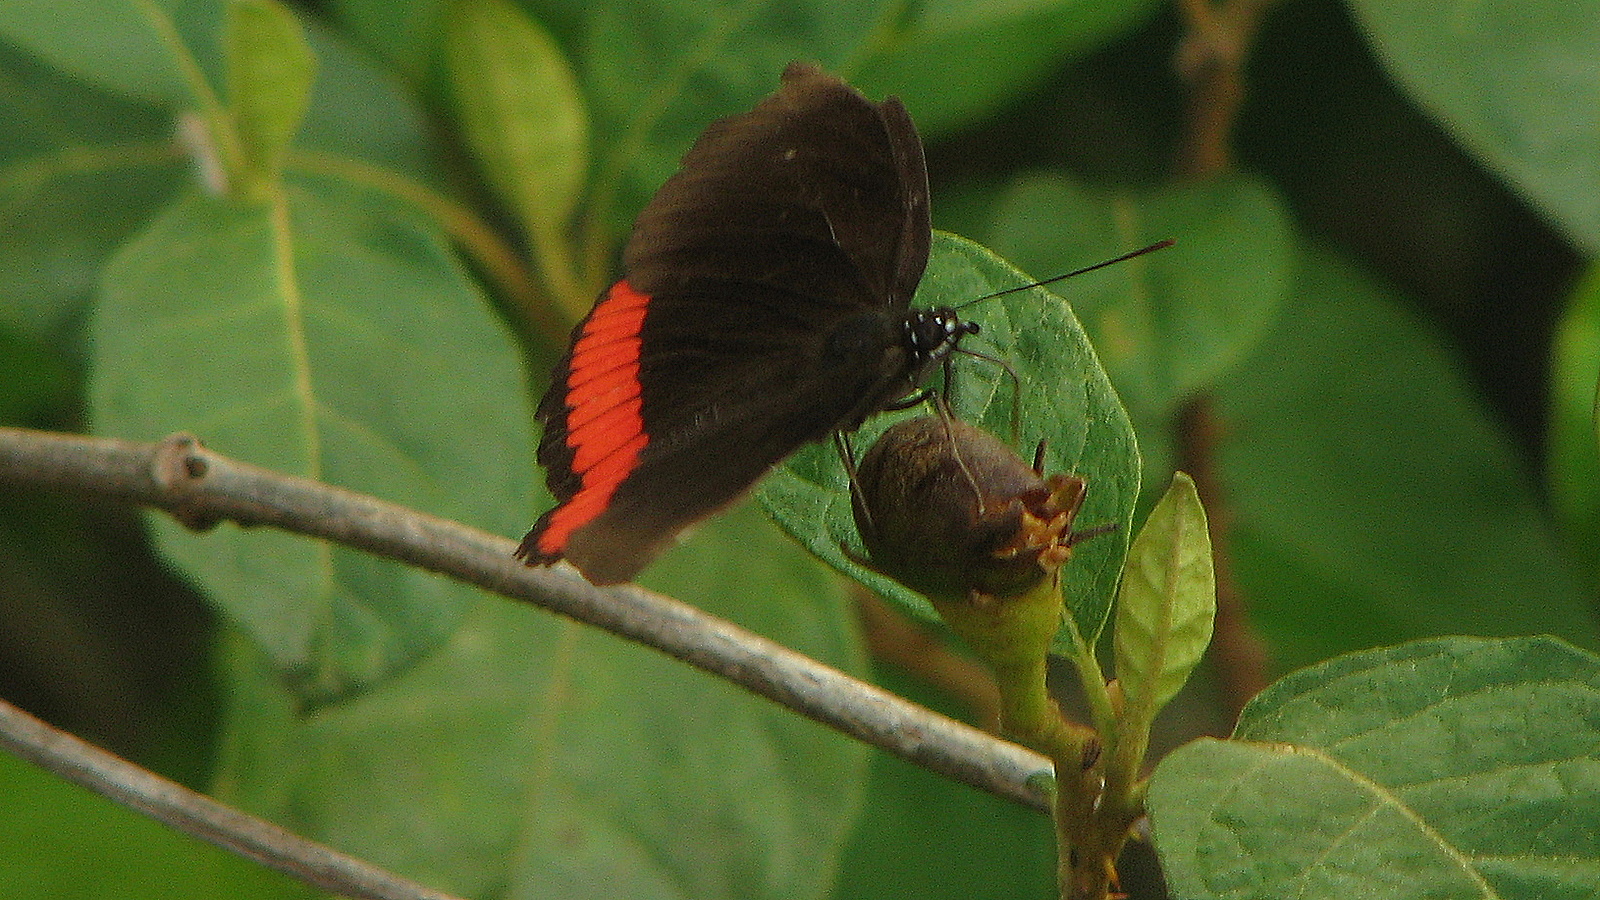 a erfly perched on a nch next to leaves